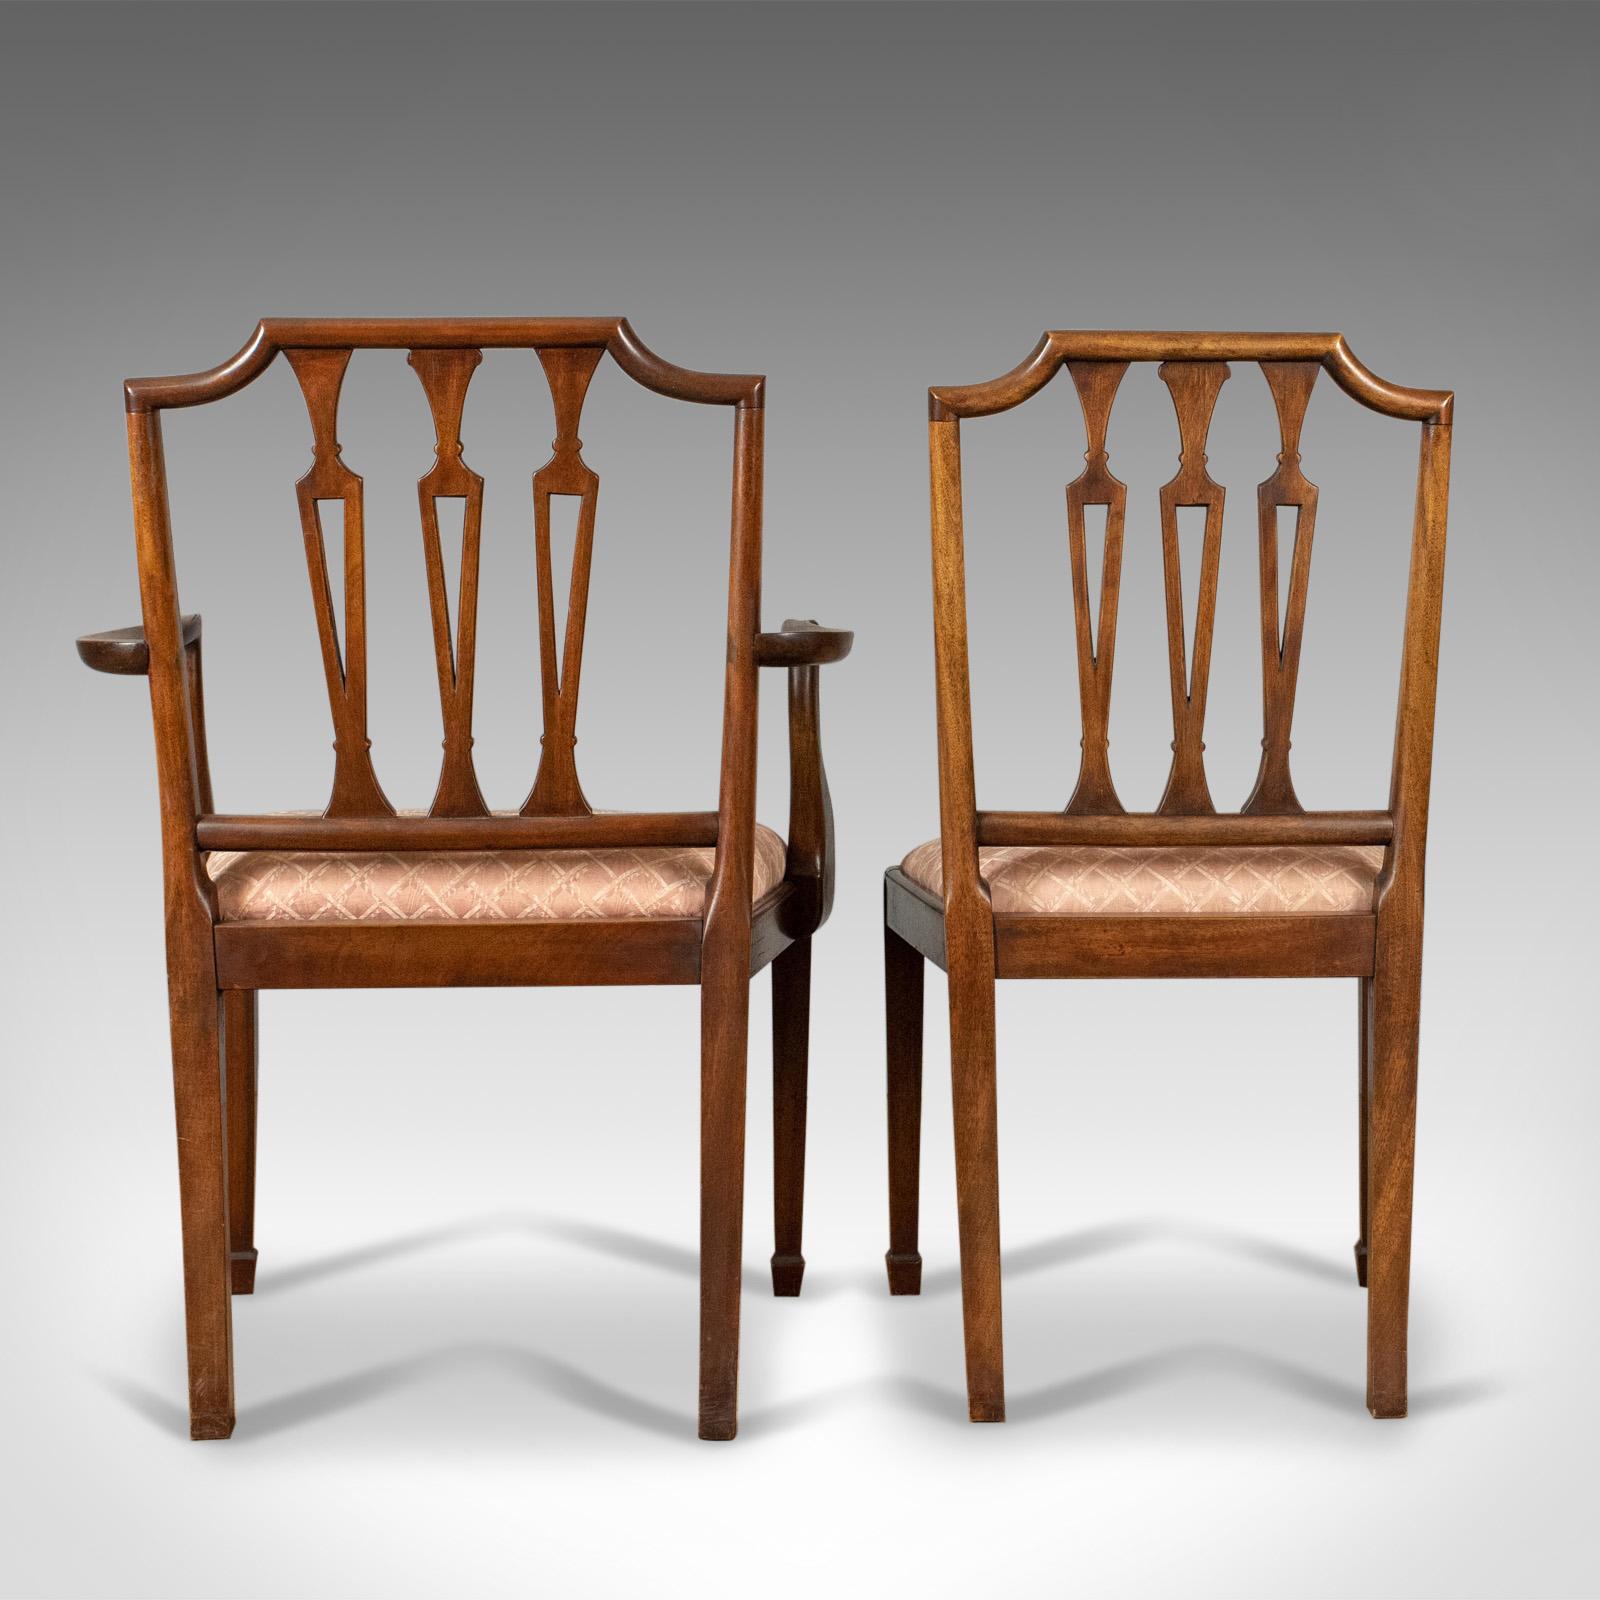 19th Century Set of Six Antique Dining Chairs, Mahogany, Victorian, Sheraton Revival